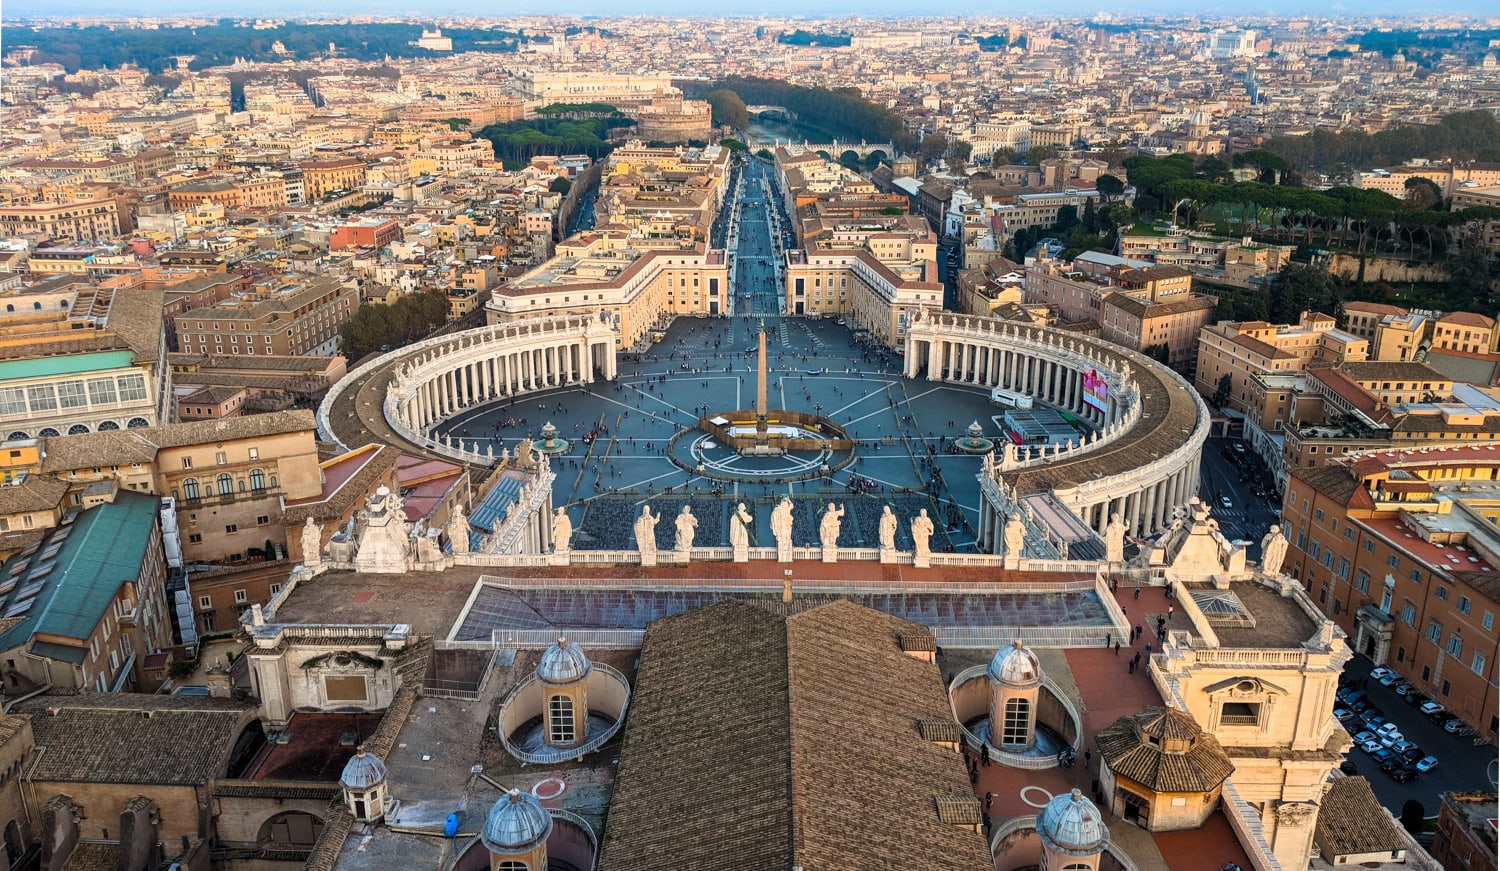 Rome Photo Blog: The Vatican with St peters square from St peters basilica